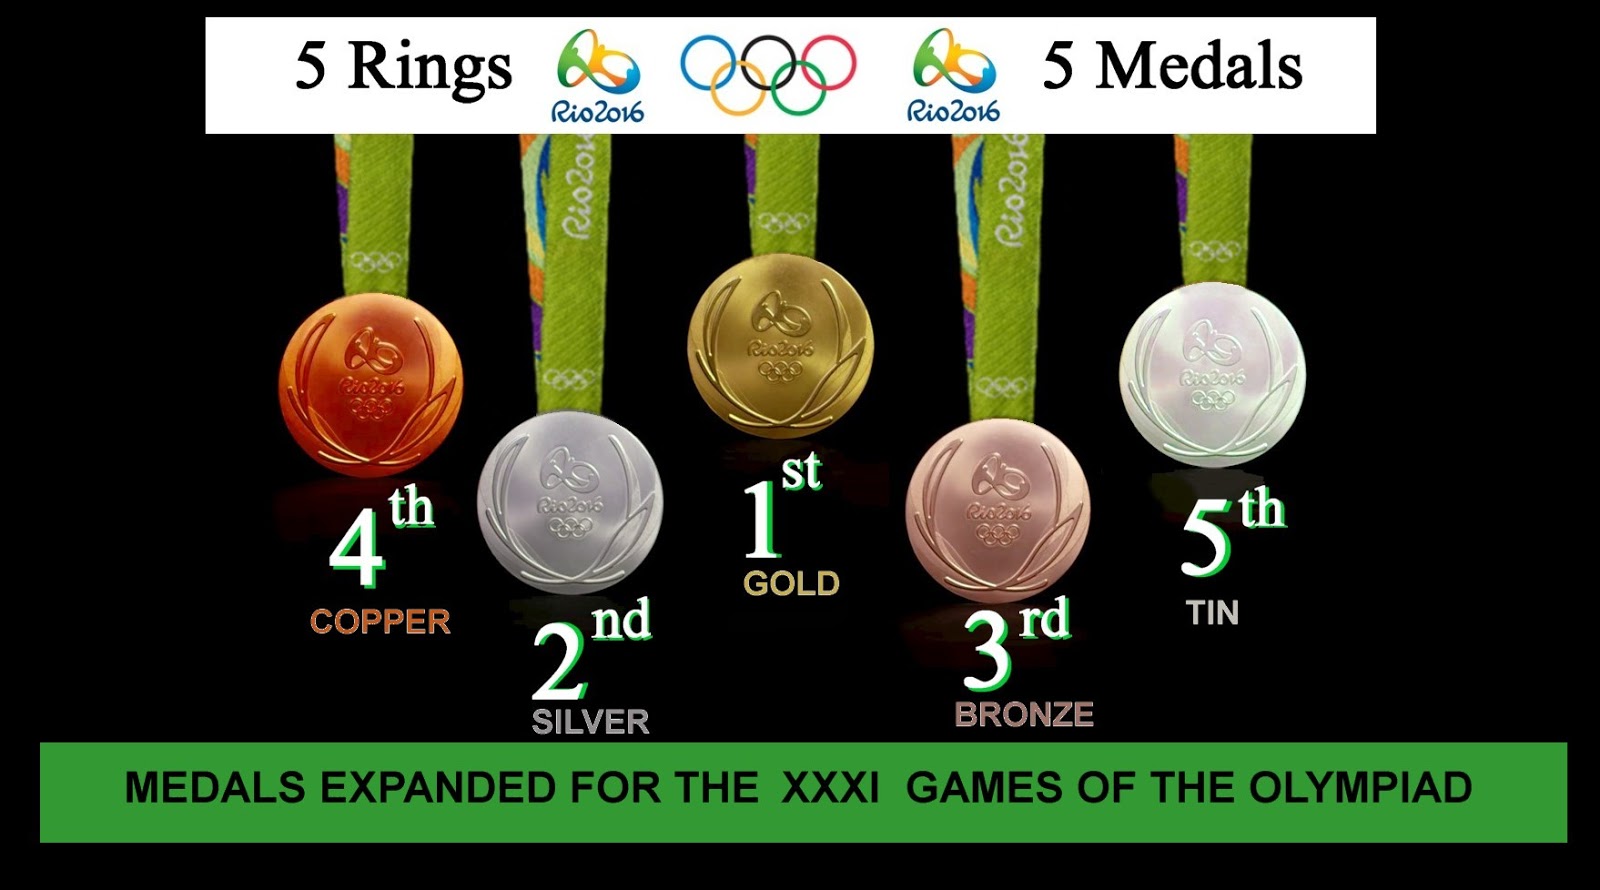 olympic%2Bmedals%2Bexpanded%2Brio%2Bolympic%2Bmedals%2Bfor%2Bfourth%2Bplace%2Band%2Bfifth%2Bplace%2Bolympic%2Brio%2Bcopper%2Bmedal%2Bfor%2B4th%2Bplace%2Bolympic%2Brio%2B2016%2Bmedal%2Bfor%2B5th%2B%2B%2Bplace%2Bthe%2Btin.jpg